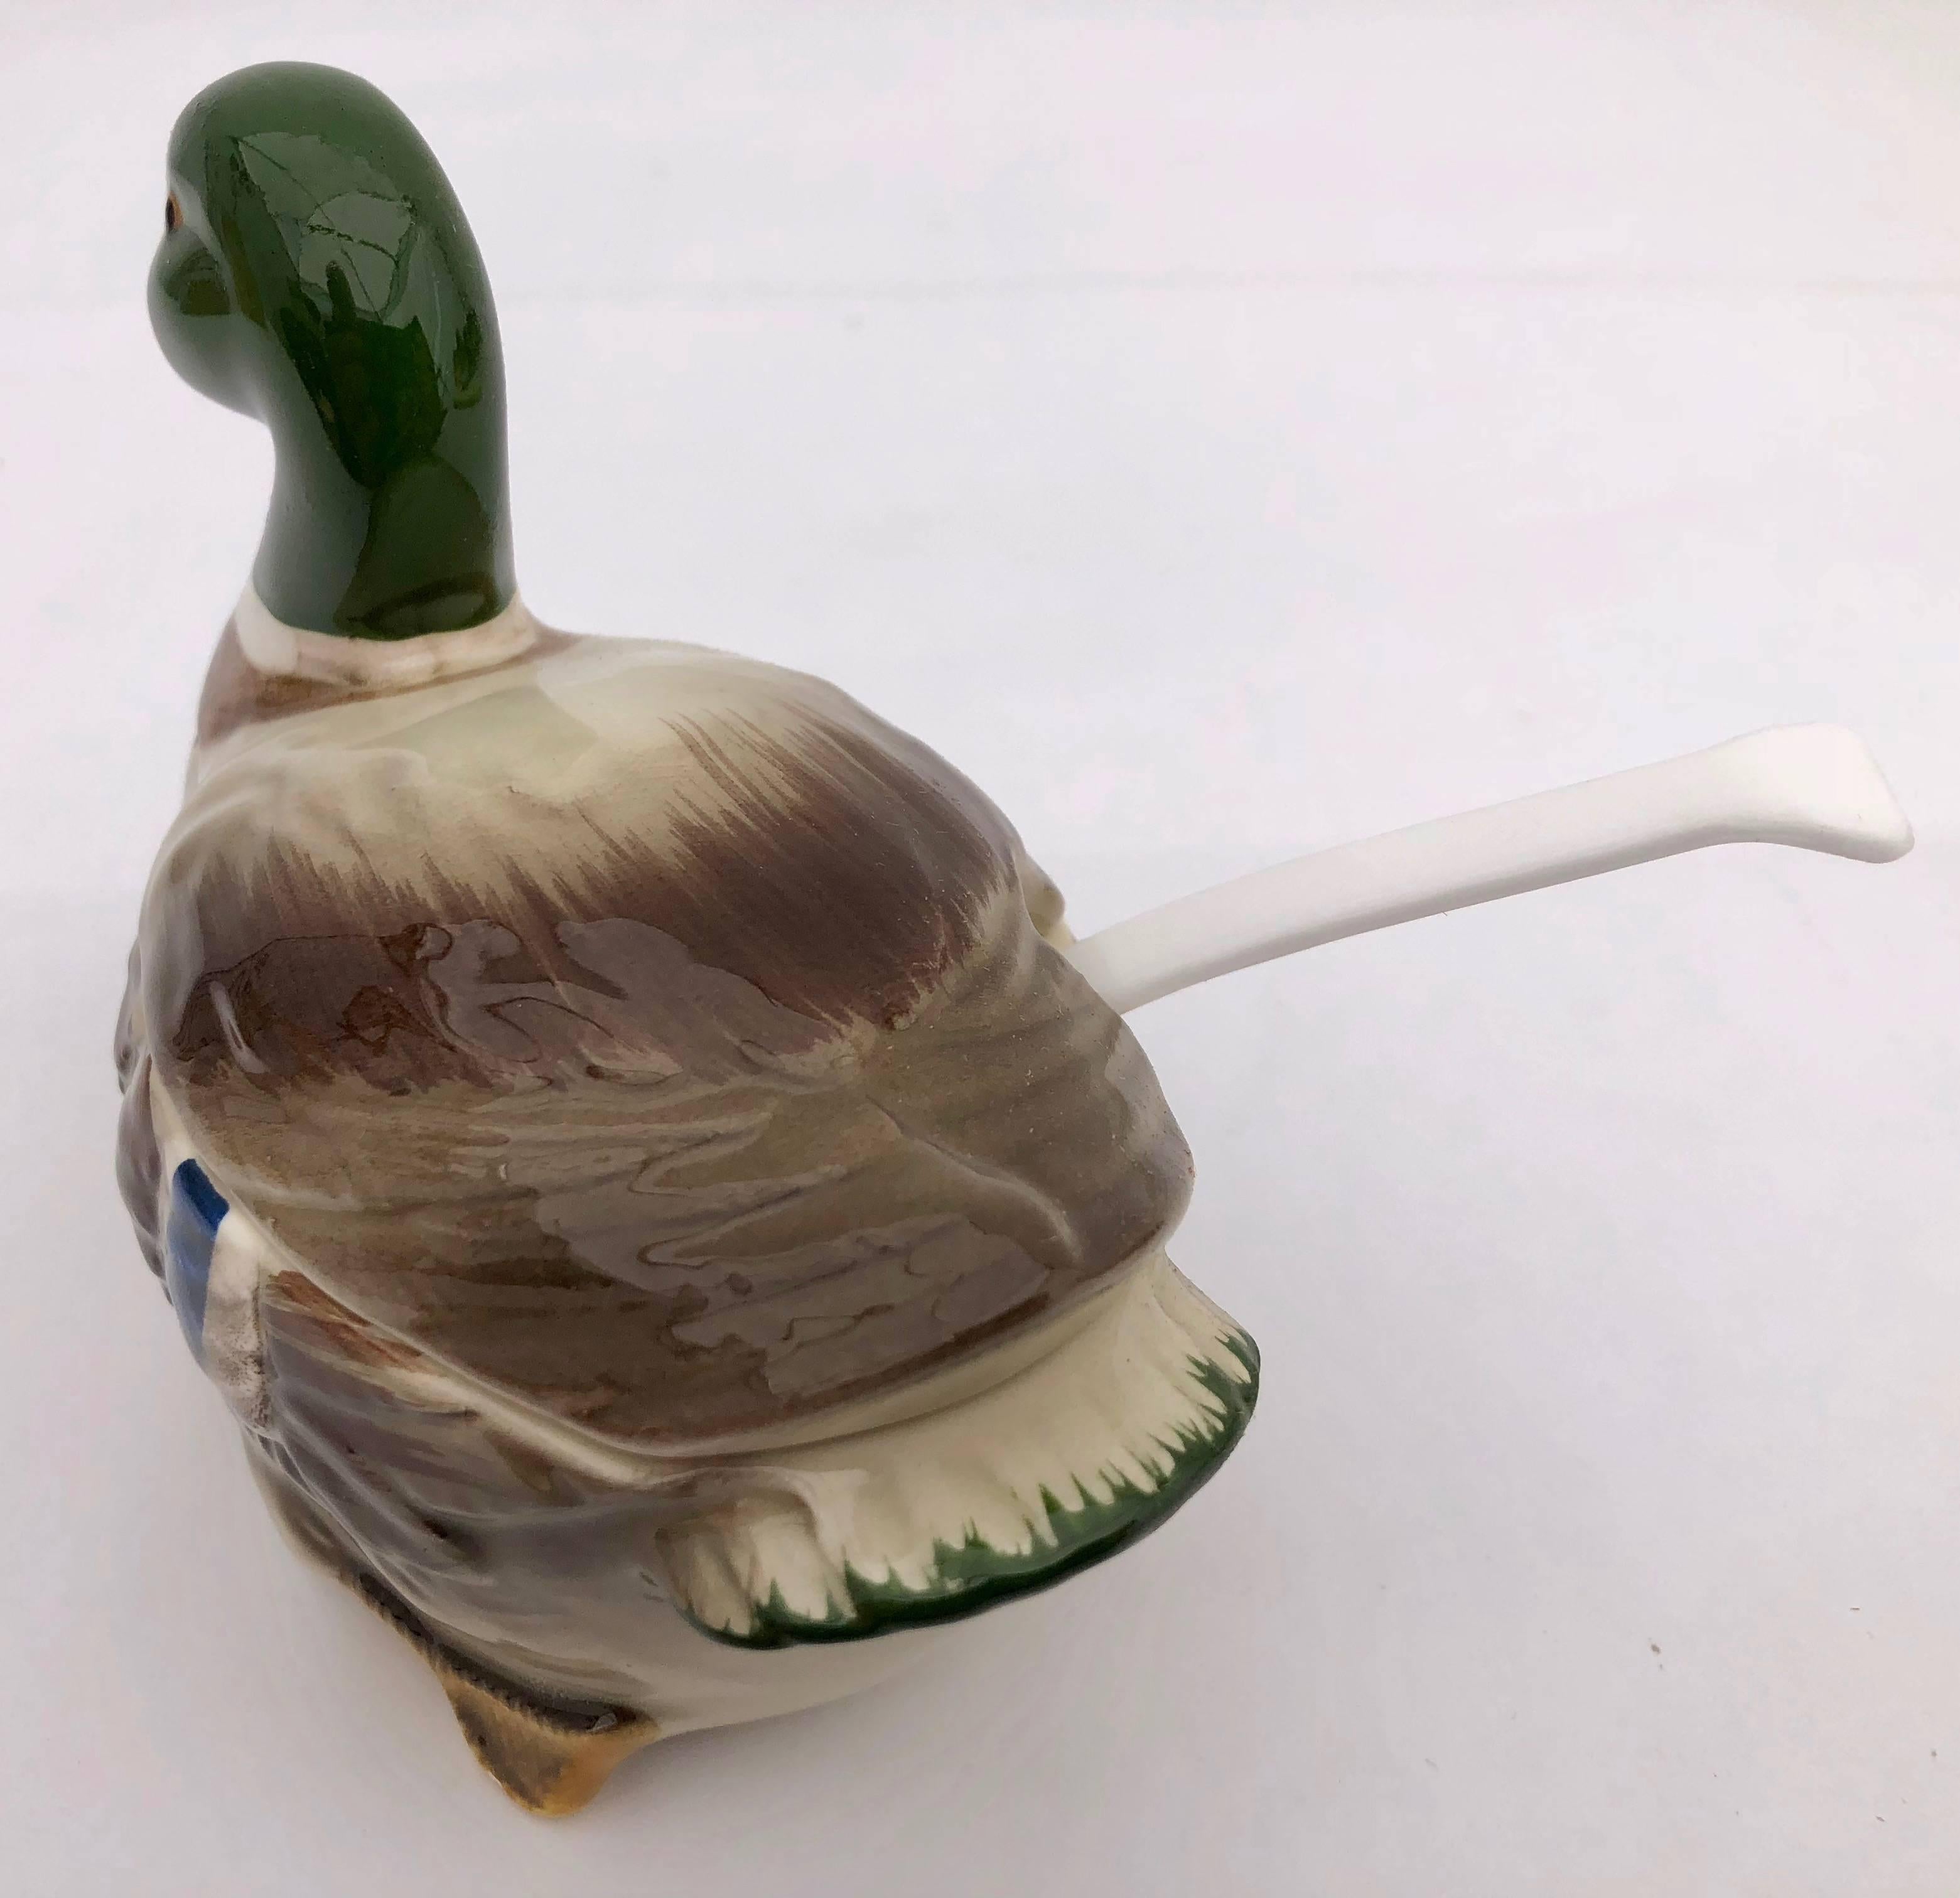 This is a handcrafted ceramic Mallard condiment bowl, by Otagiri, Japan. It was purchased for a French restaurant, but never used. The hand painted colors are vibrant. this would add a wonderful touch to any table. We have 7 of these and are selling